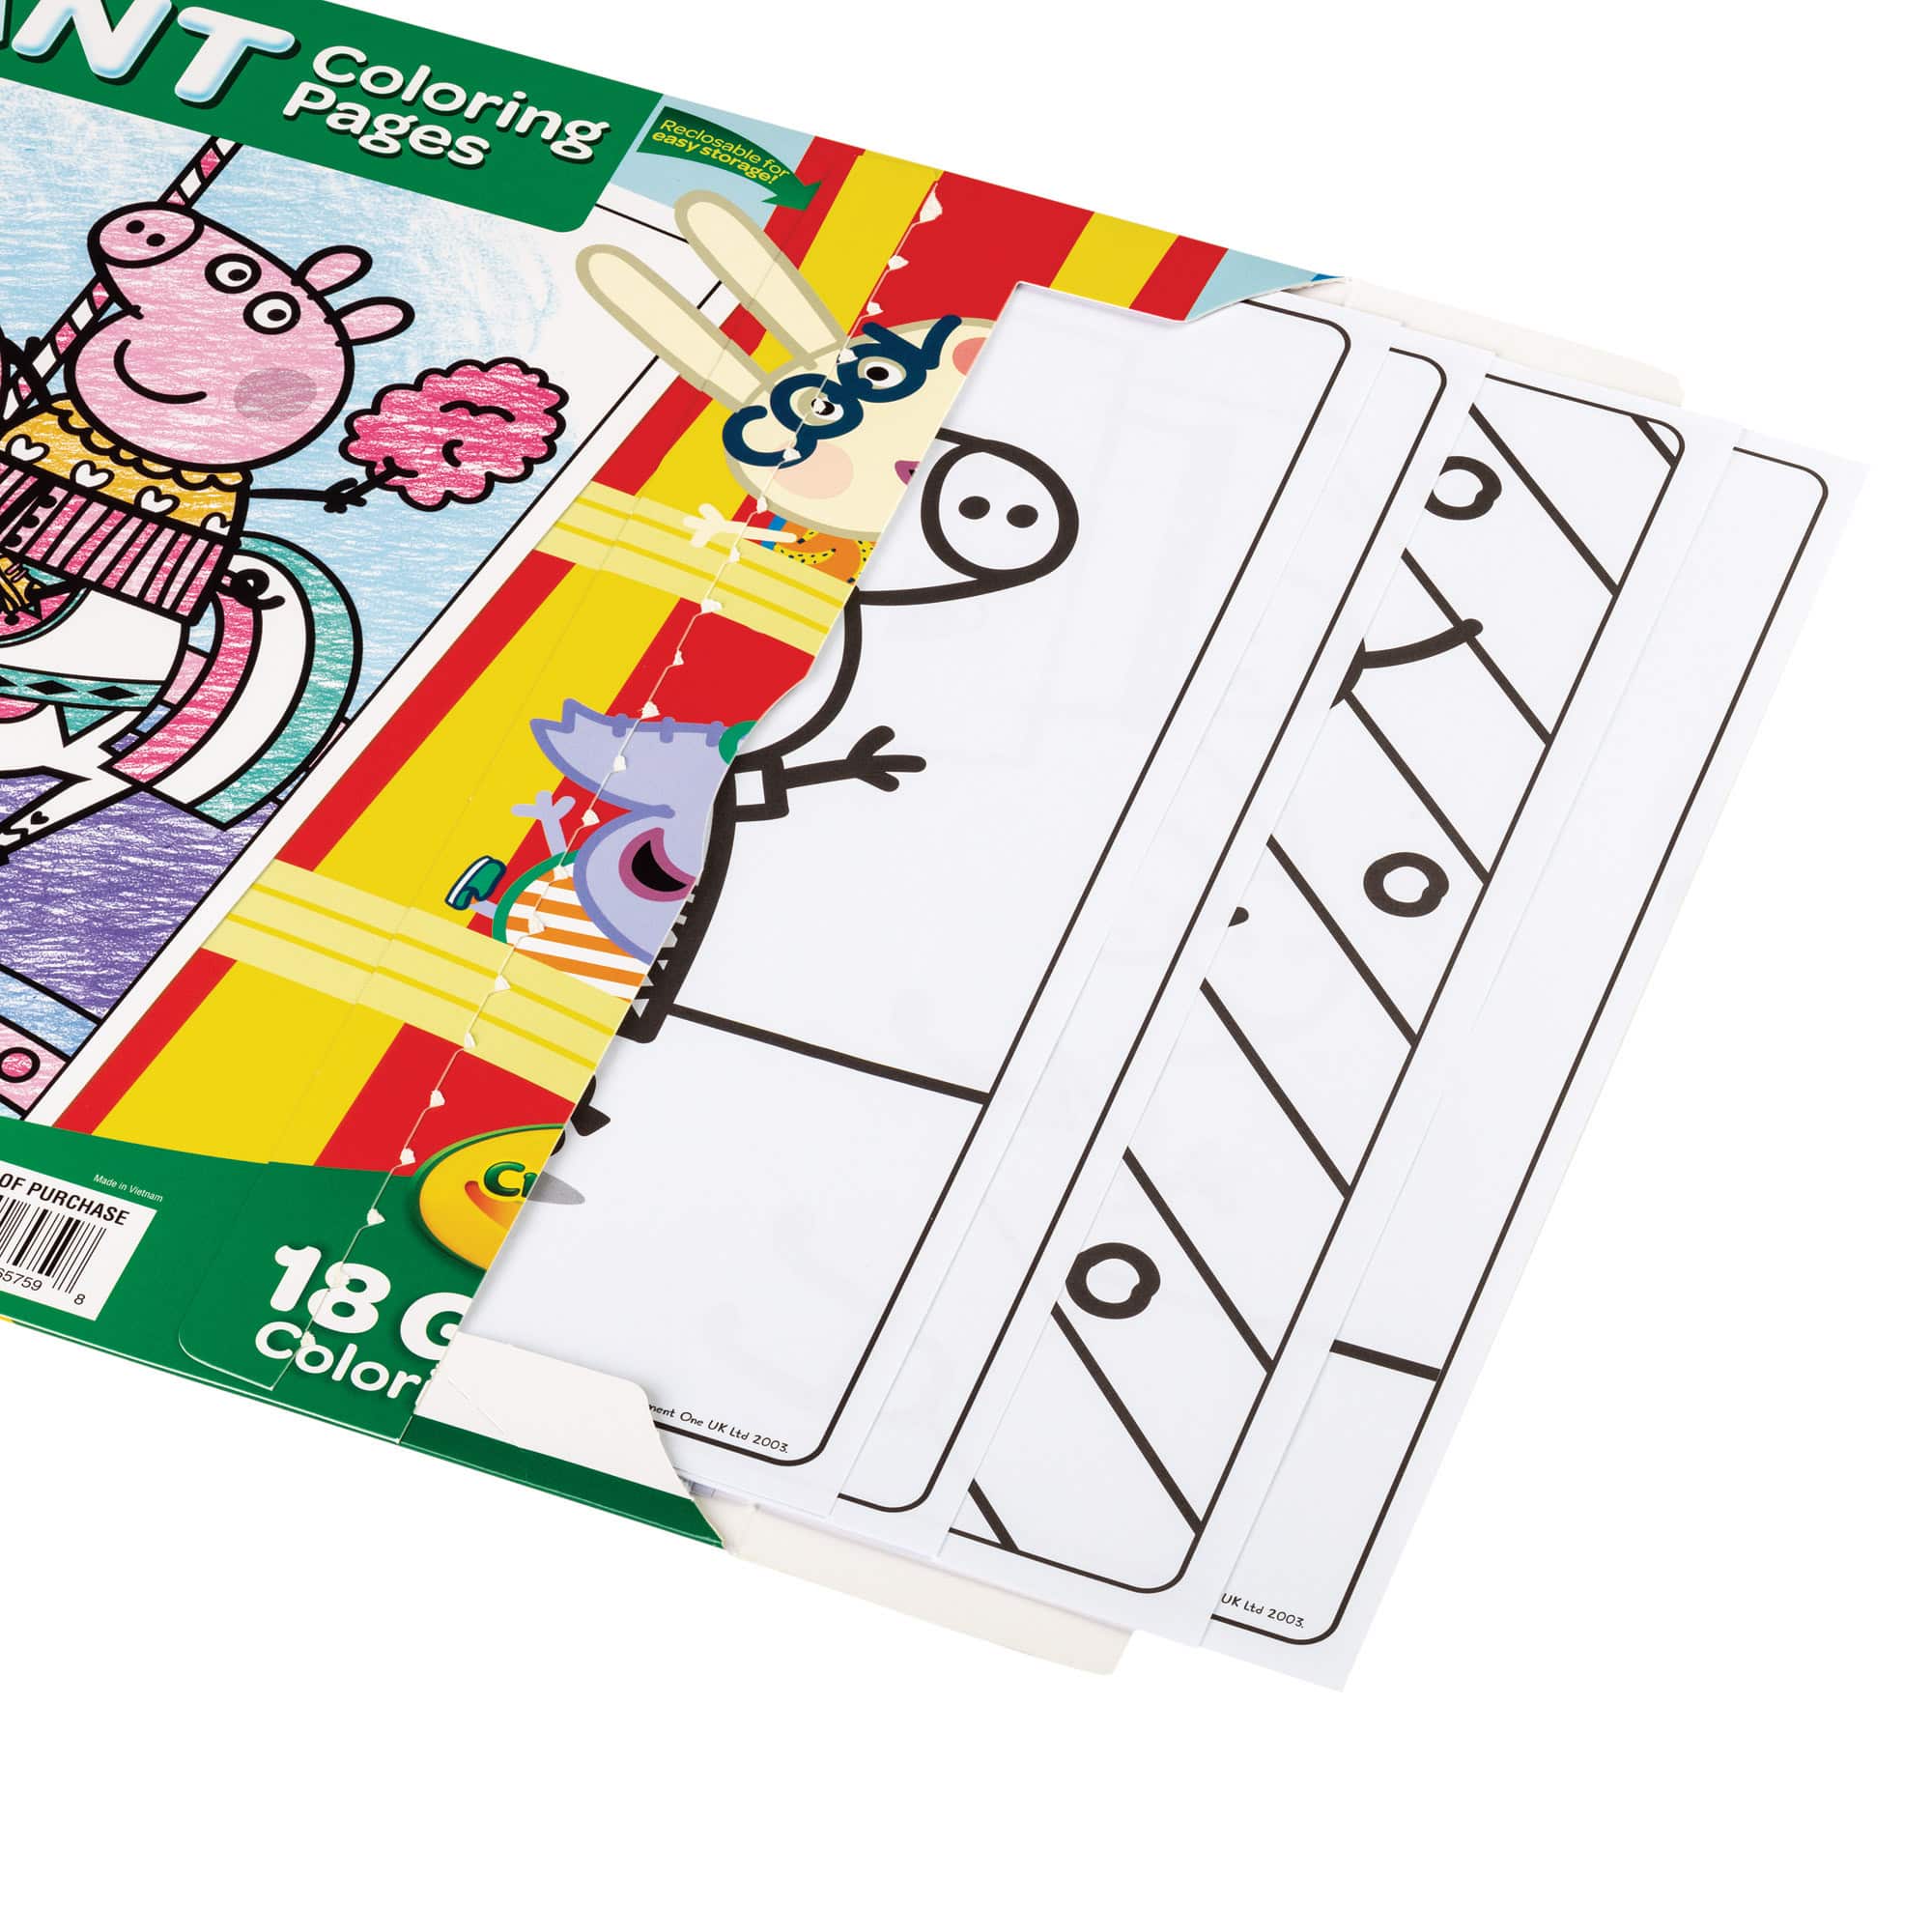 Crayola Giant Colouring Pages - Peppa Pig